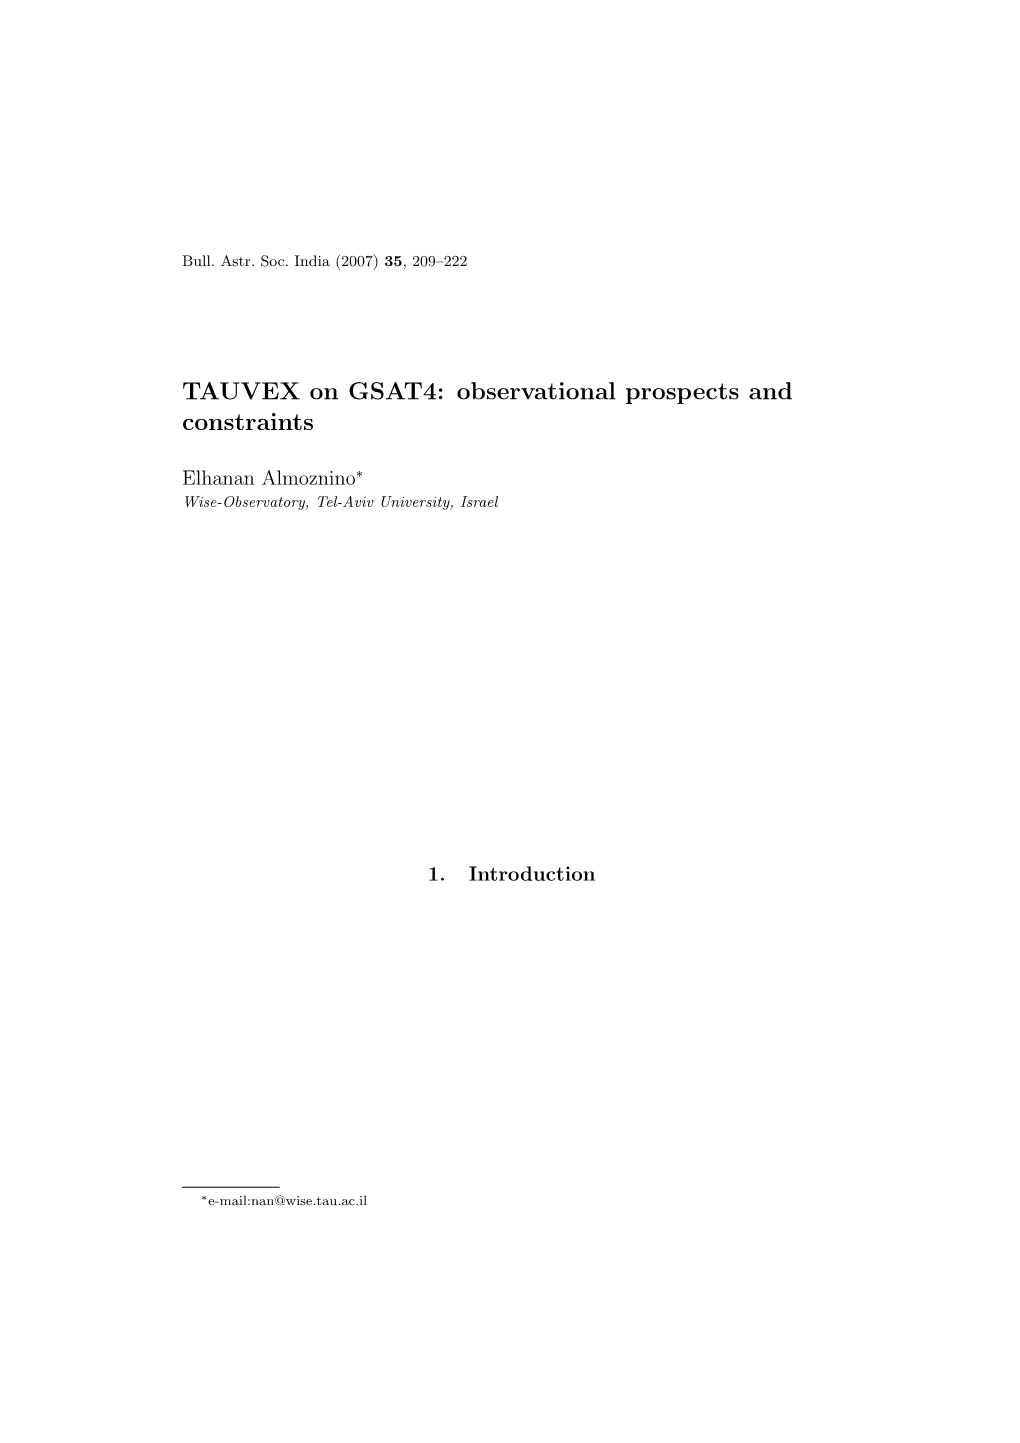 TAUVEX on GSAT4: Observational Prospects and Constraints